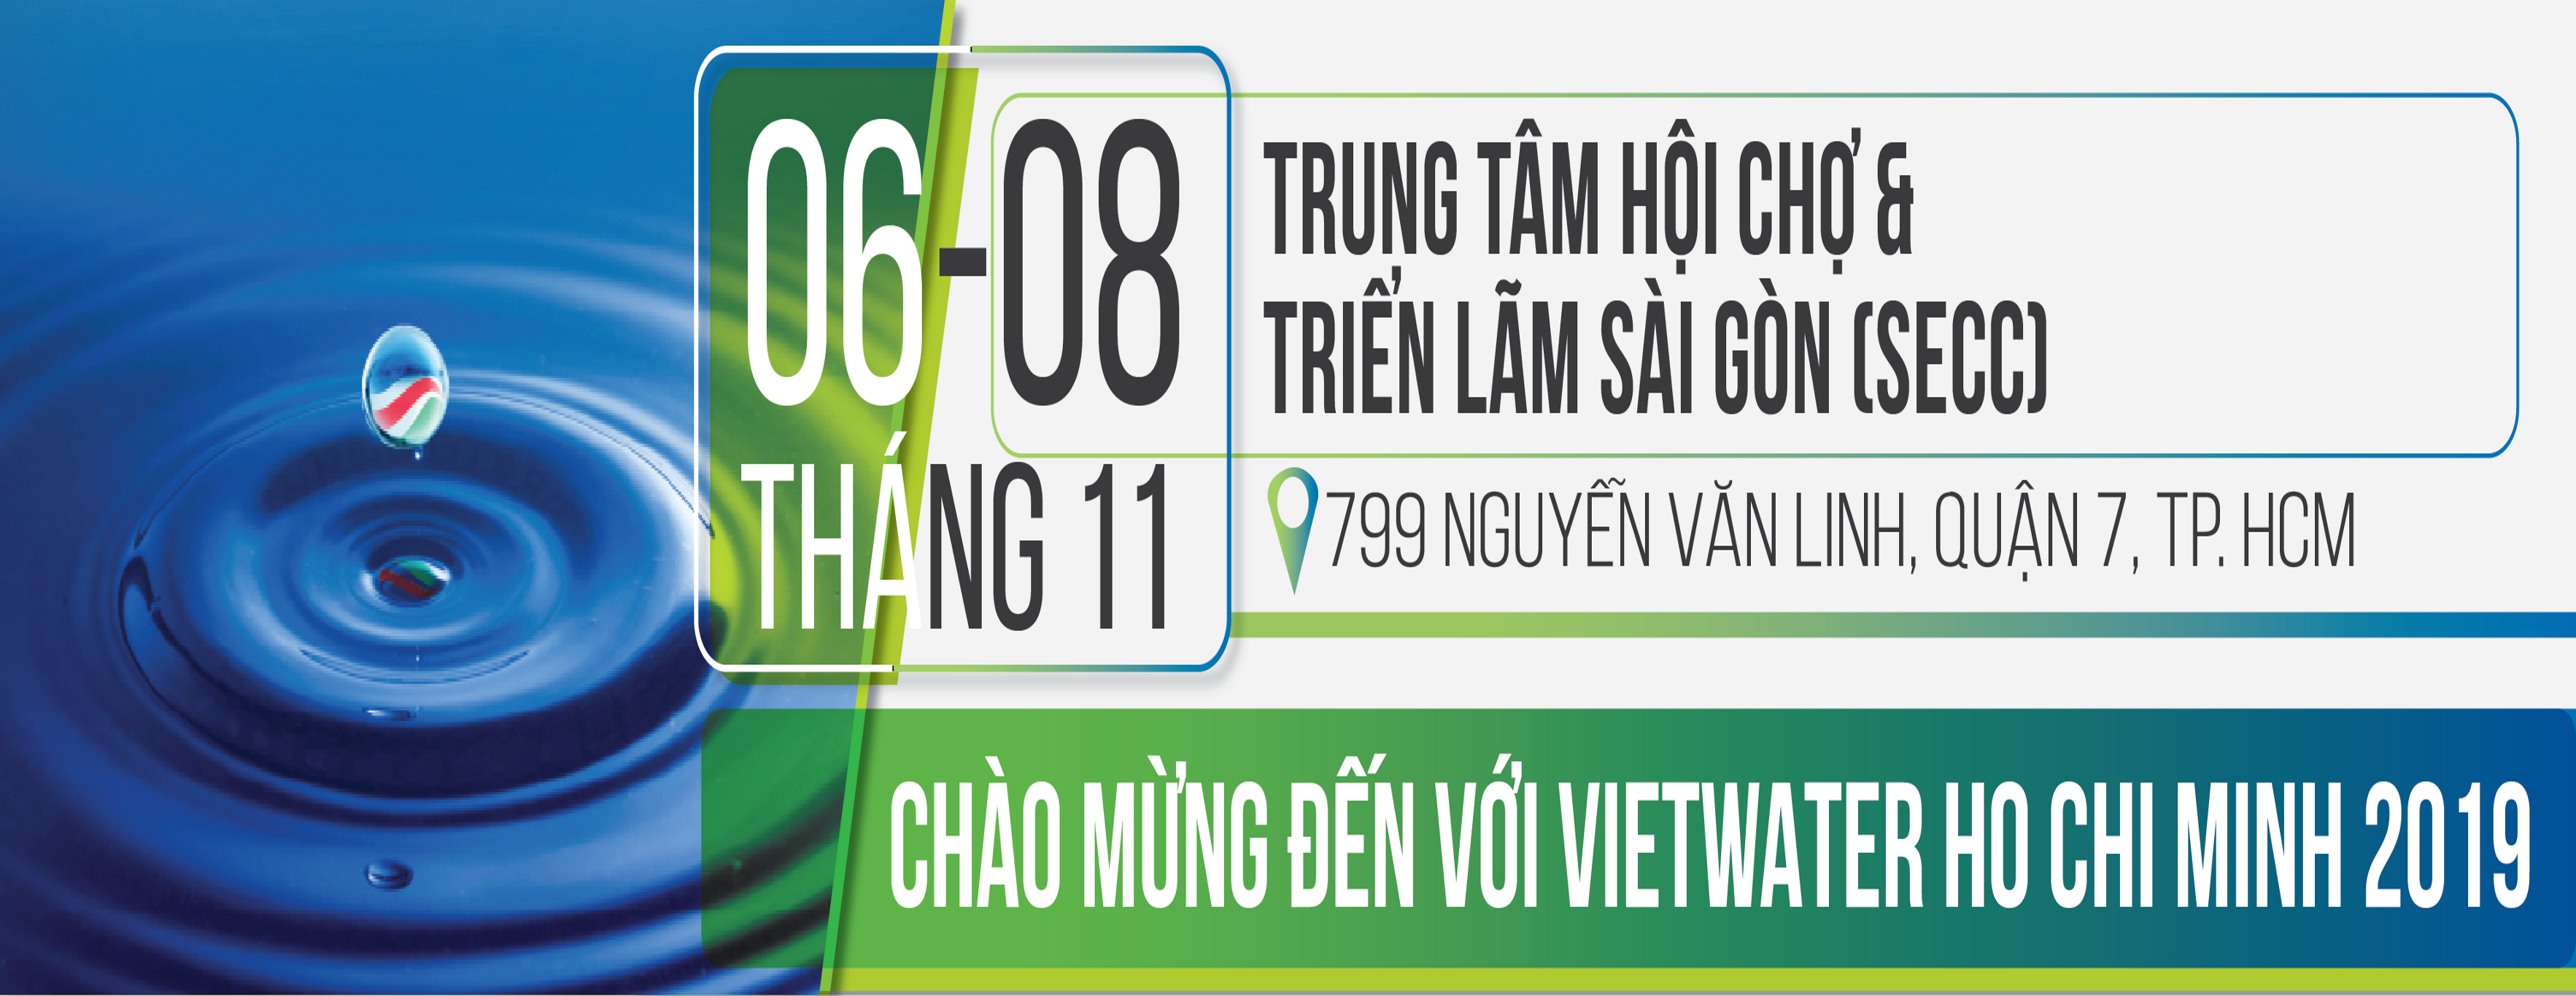 vietwater-2019-moi-nhat